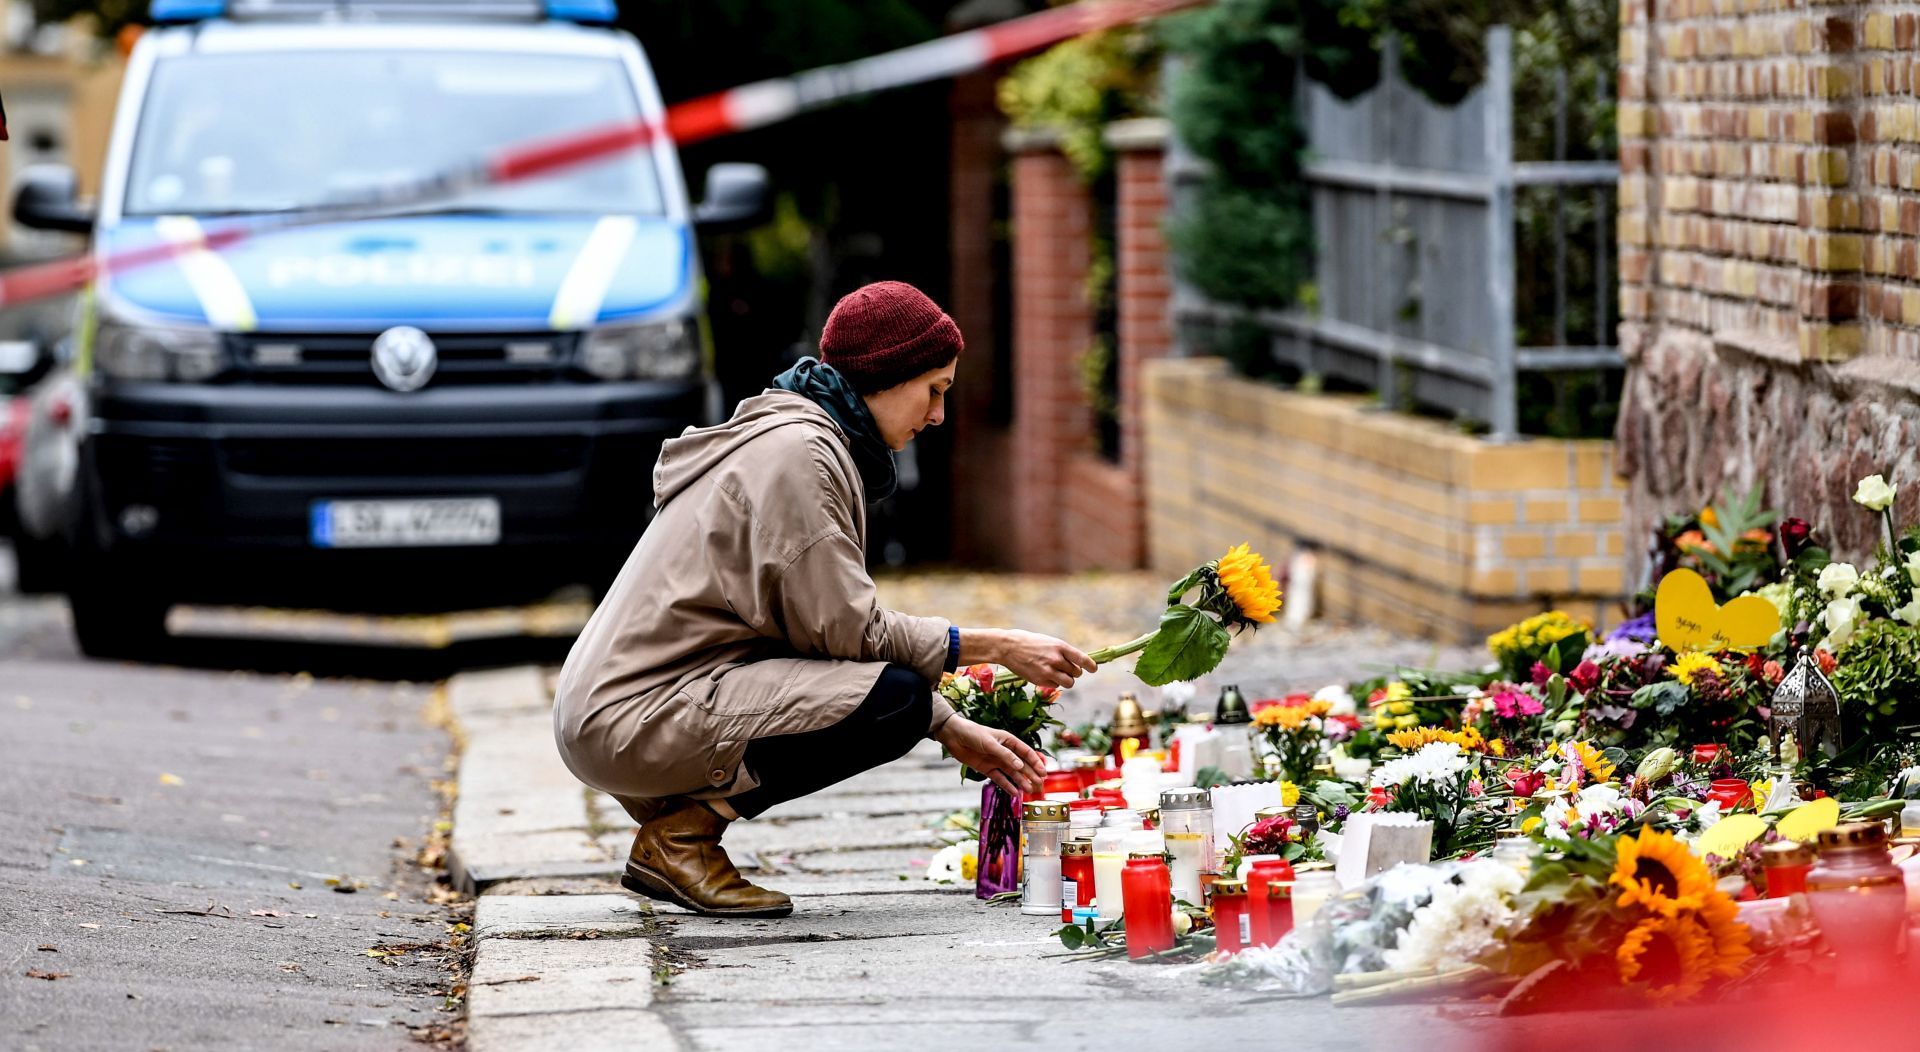 epa07912746 A woman places a flower in front of the synagogue in Halle Saale, Germany, 11 October 2019. According to the police two people were killed on 09 October in shootings in front of the synagogue and a Kebab shop in Halle. A man went on rampage shooting on 09 October and tried to enter the Halle synagogue during the celebrations on the Jewish holiday of Yom Kippur.  EPA/FILIP SINGER